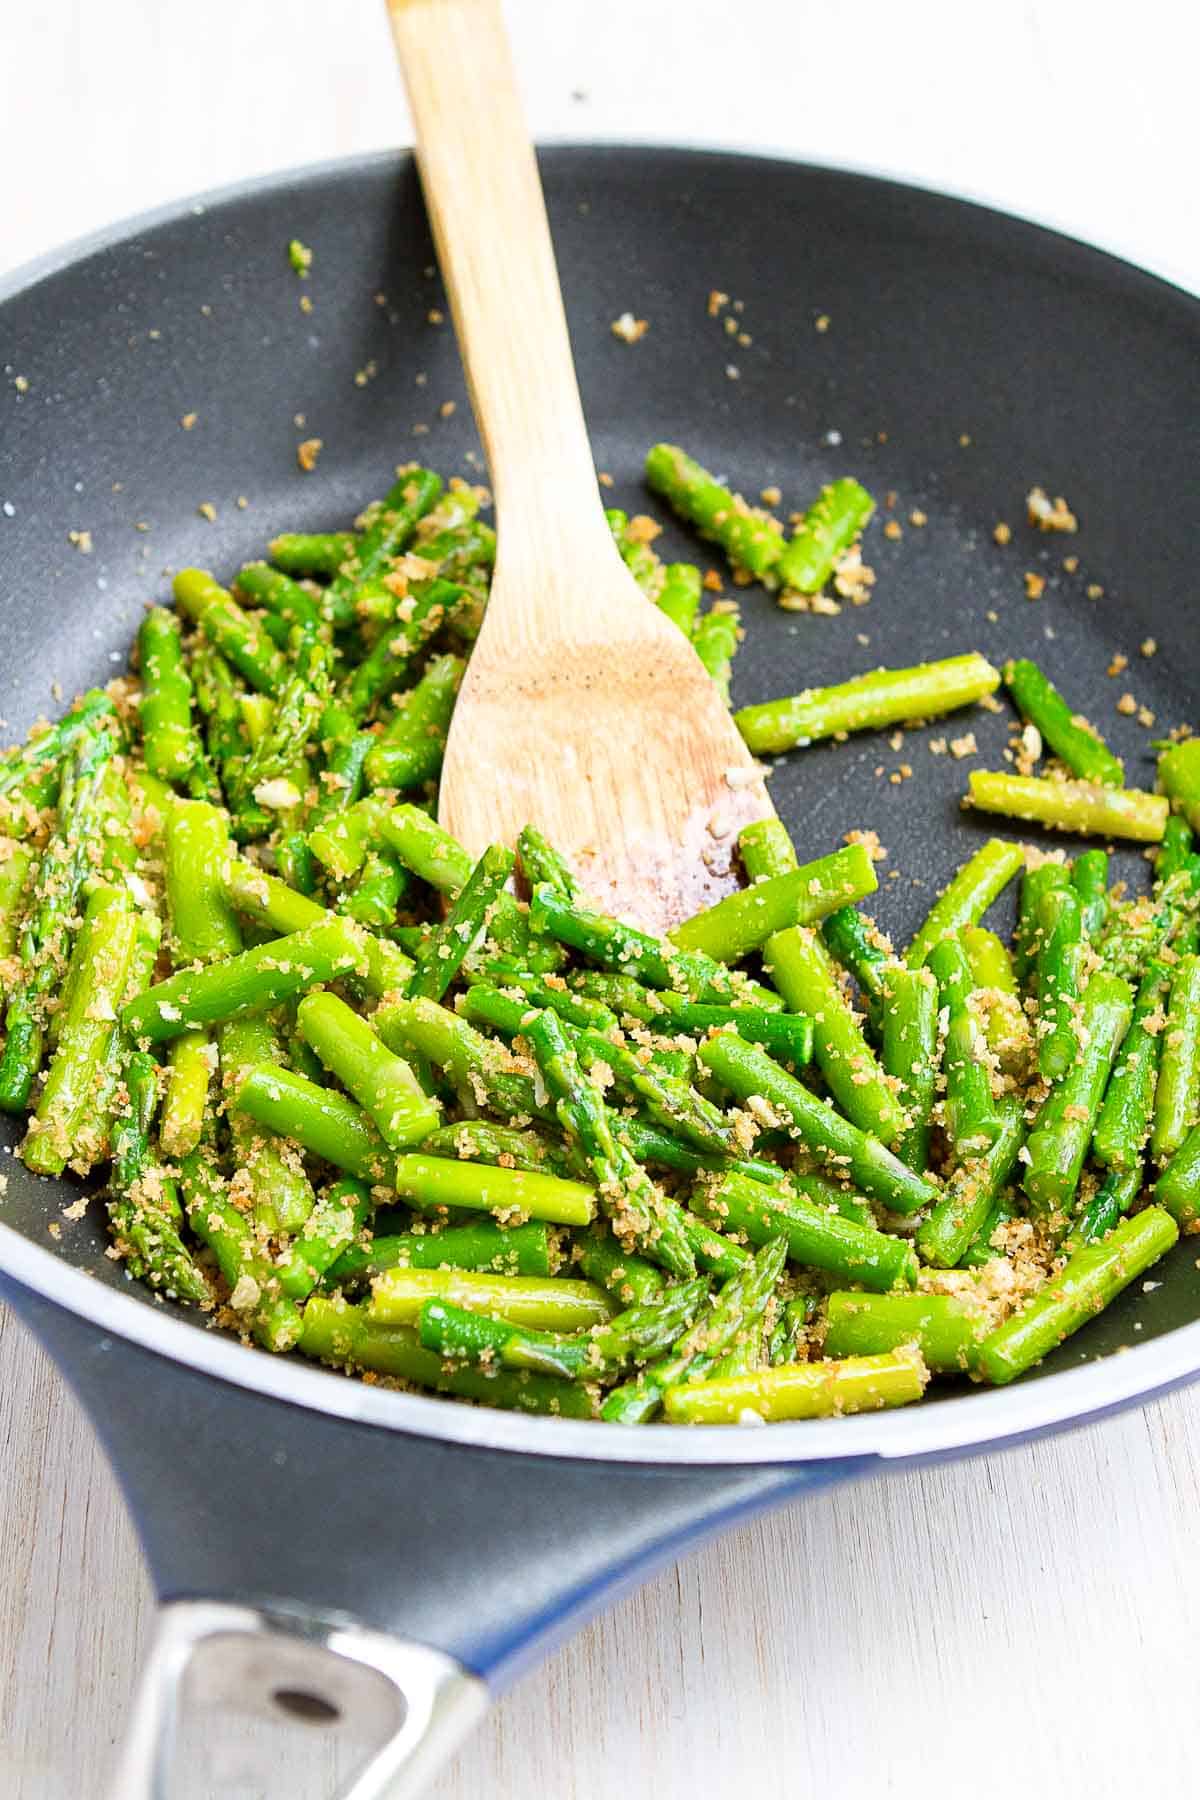 Sauteed asparagus, mixed with garlicky breadcrumbs, in a black skillet.